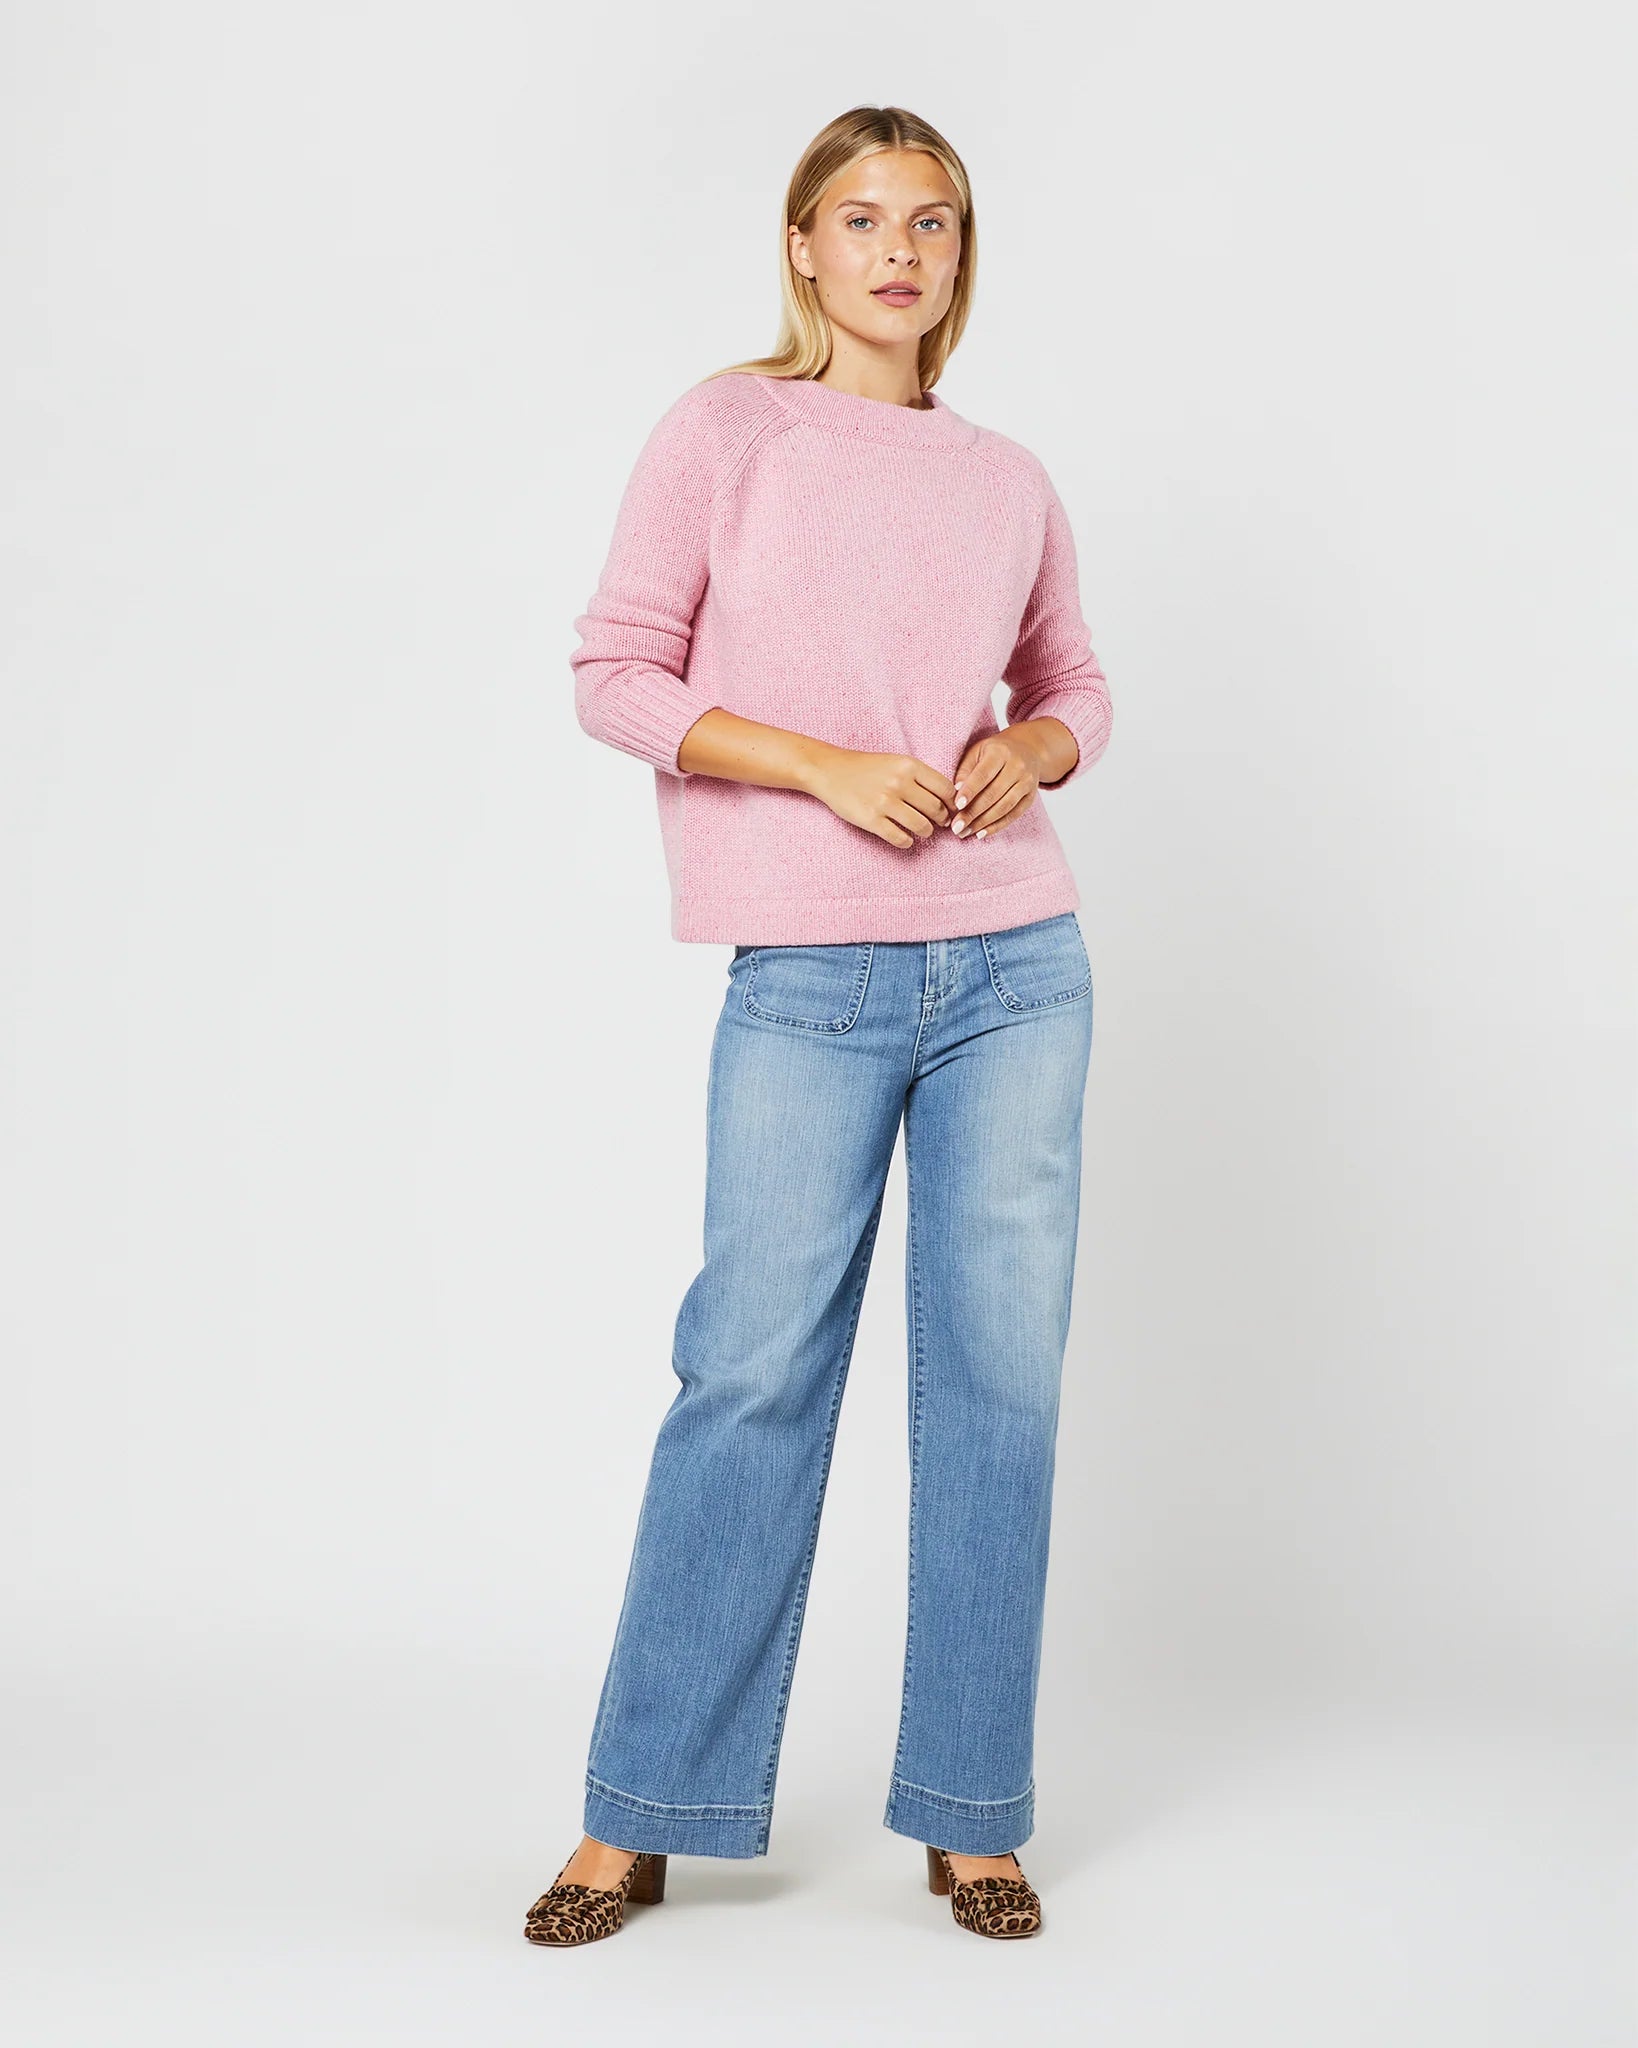 Ann Mashburn Golightly Sweater Pink Donegal